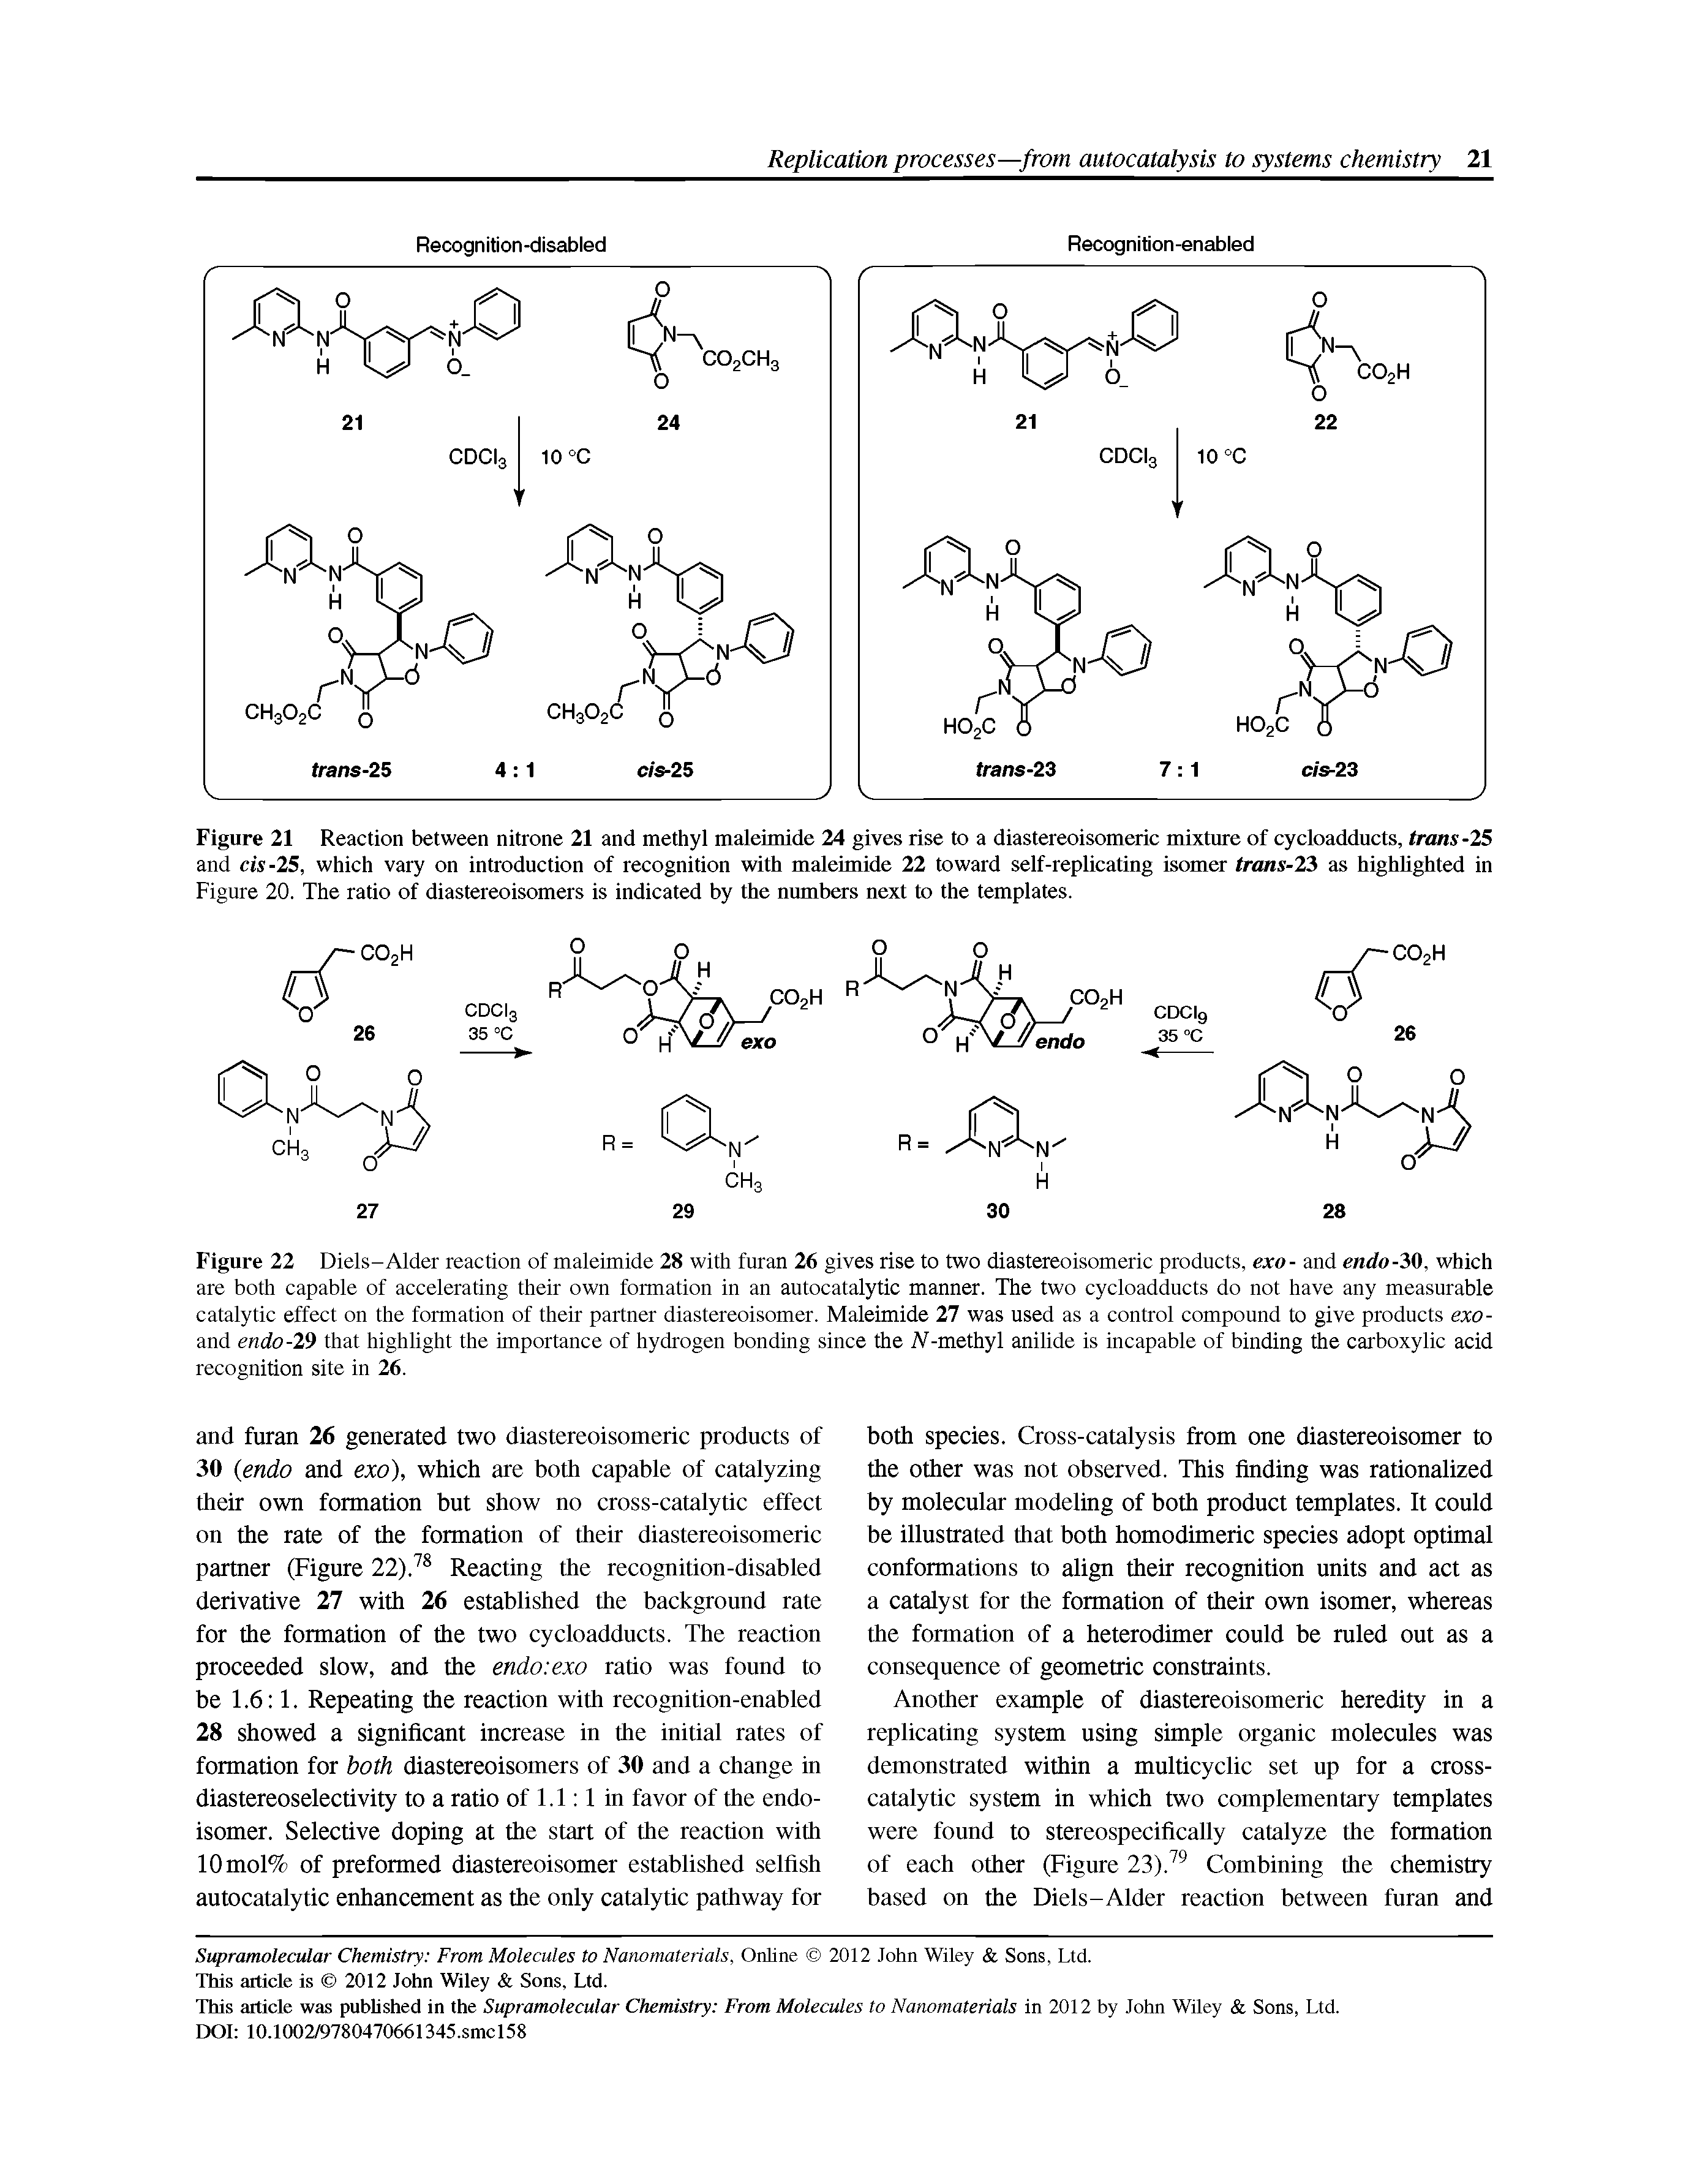 Figure 22 Diels-Alder reaction of maleimide 28 with furan 26 gives rise to two diastereoisomeric products, exo- and endo-30, which are both capable of accelerating their own formation in an autocatalytic manner. The two cycloadducts do not have any measurable catalytic effect on the formation of their partner diastereoisomer. Maleimide 27 was used as a control compound to give products exo-and endo-29 that highlight the importance of hydrogen bonding since the iV-methyl anihde is incapable of binding the carboxylic acid recognition site in 26.